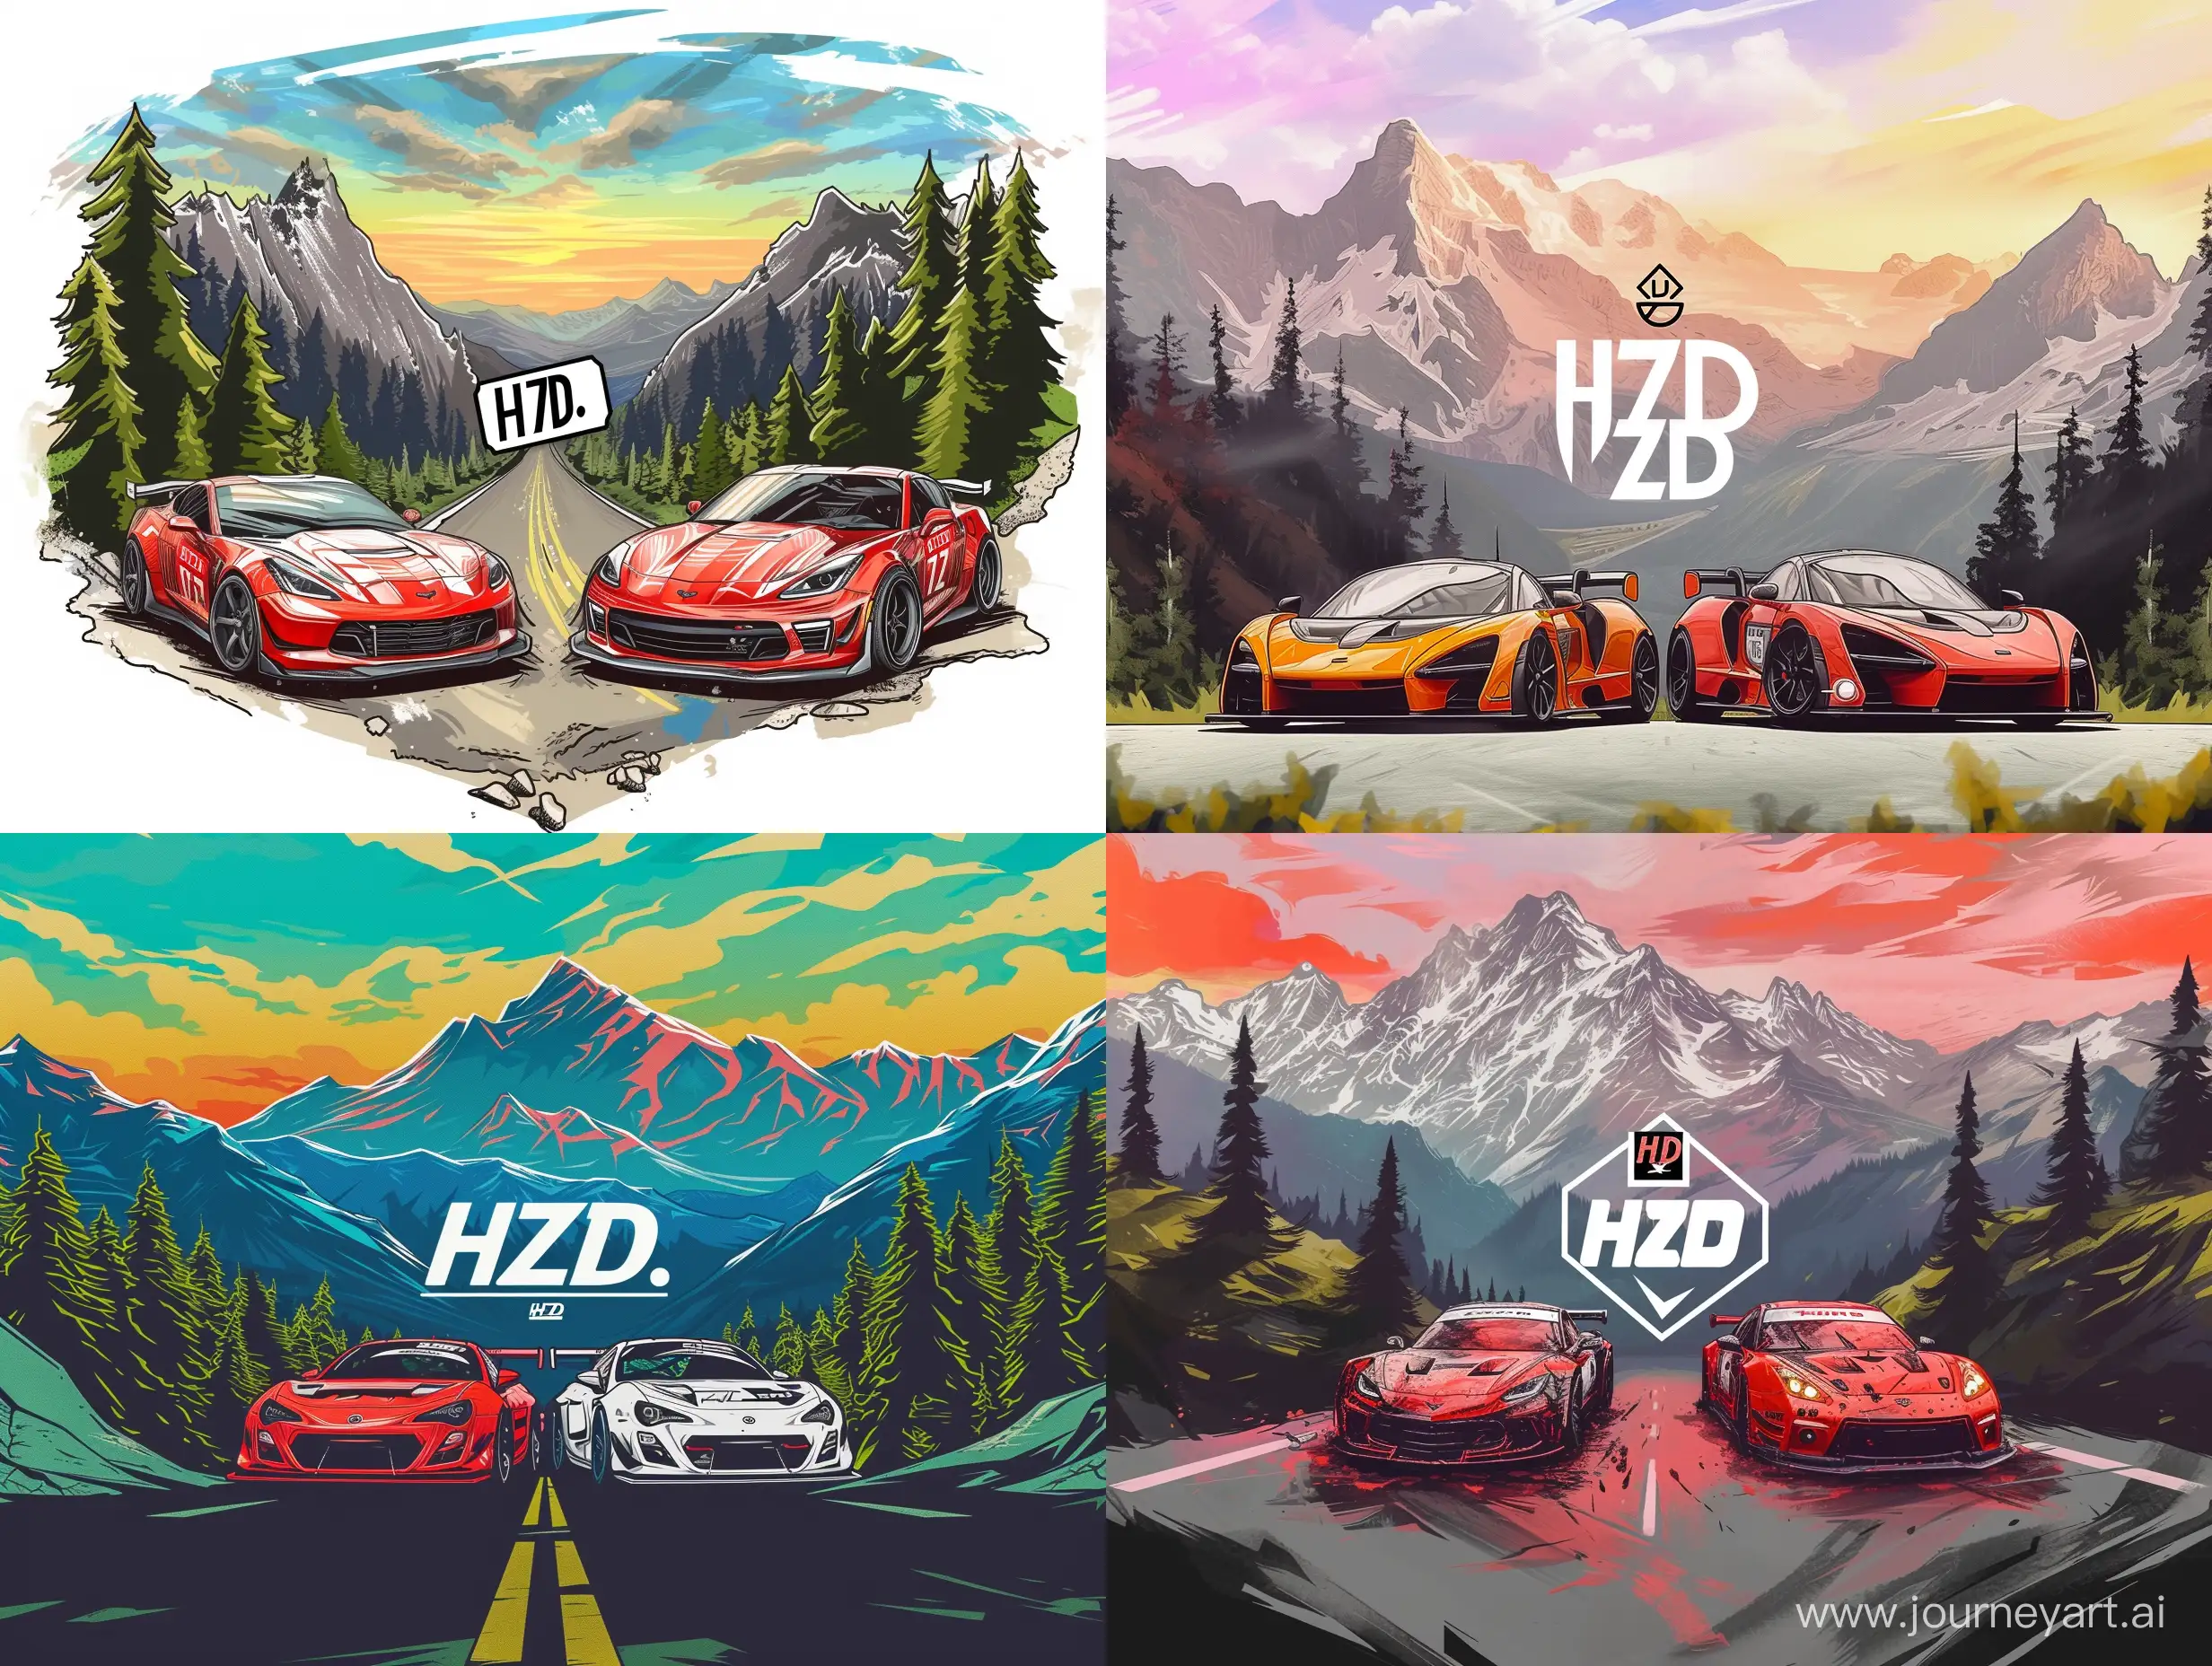 Dynamic-Couple-Car-Race-Logo-with-HZD-Tag-and-Scenic-Mountain-Backdrop